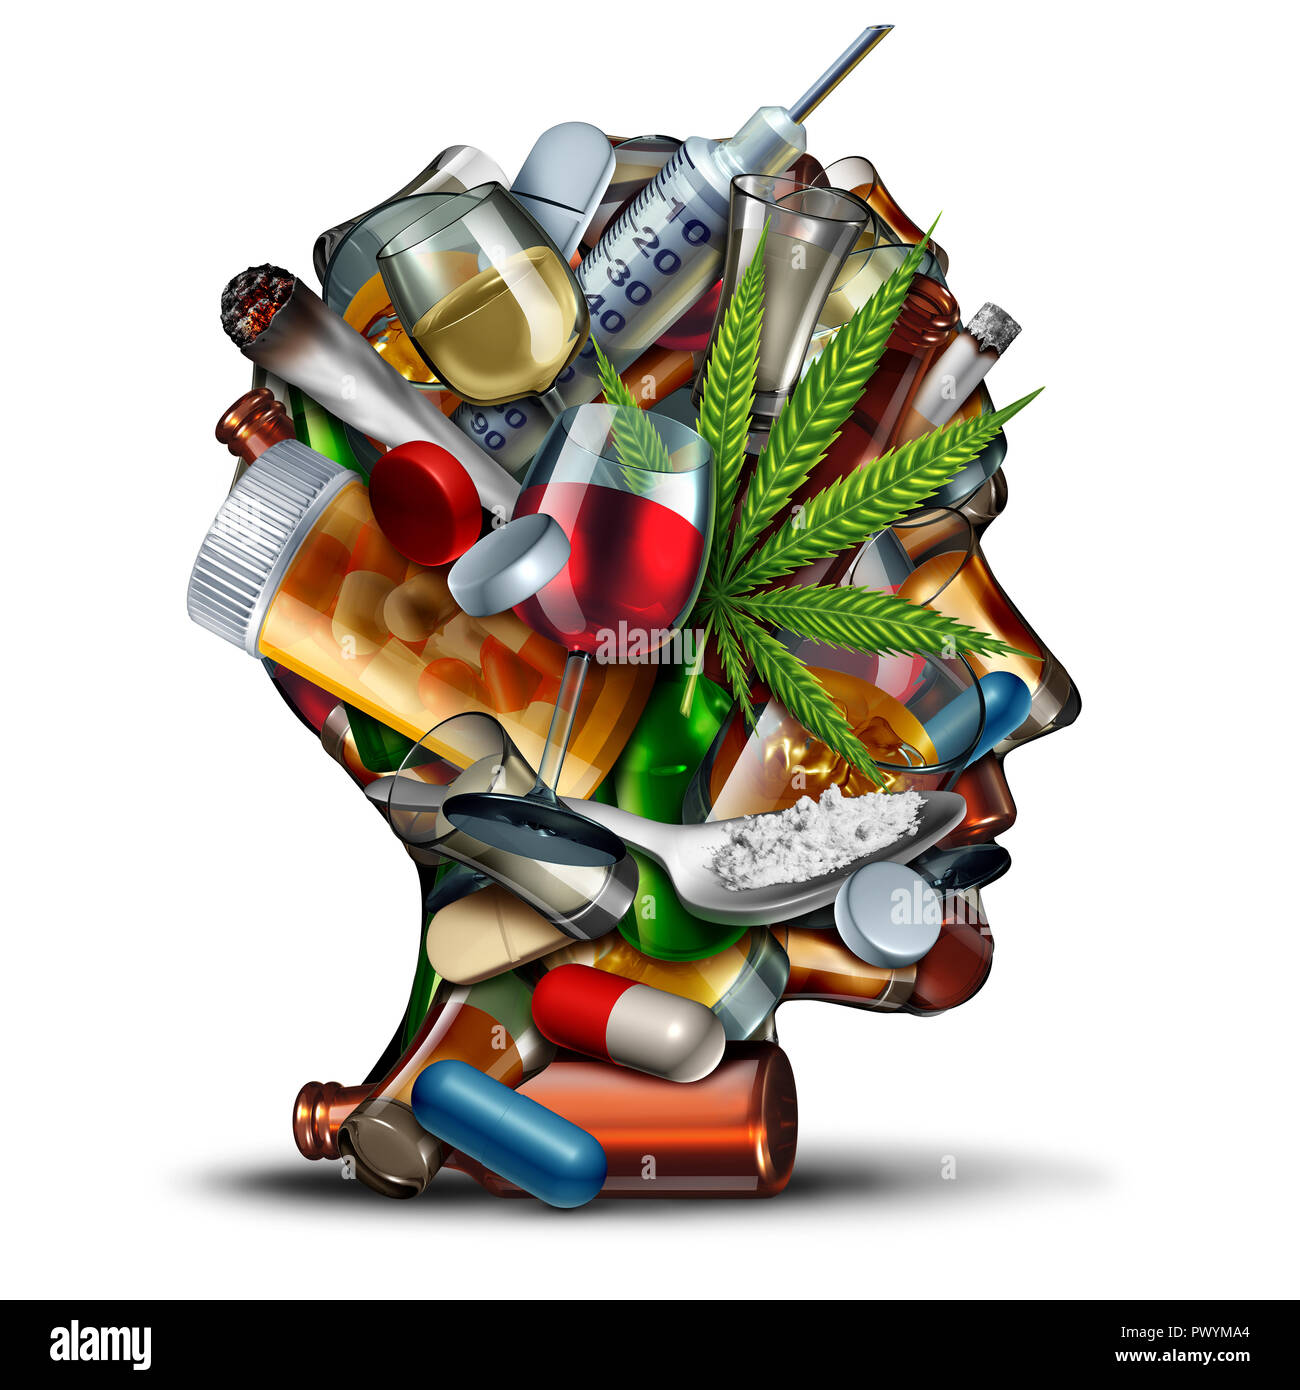 Concept of drug addiction and substance dependence as a junkie symbol or addict health problem with cocaine heroin cannabis alcohol and prescription. Stock Photo